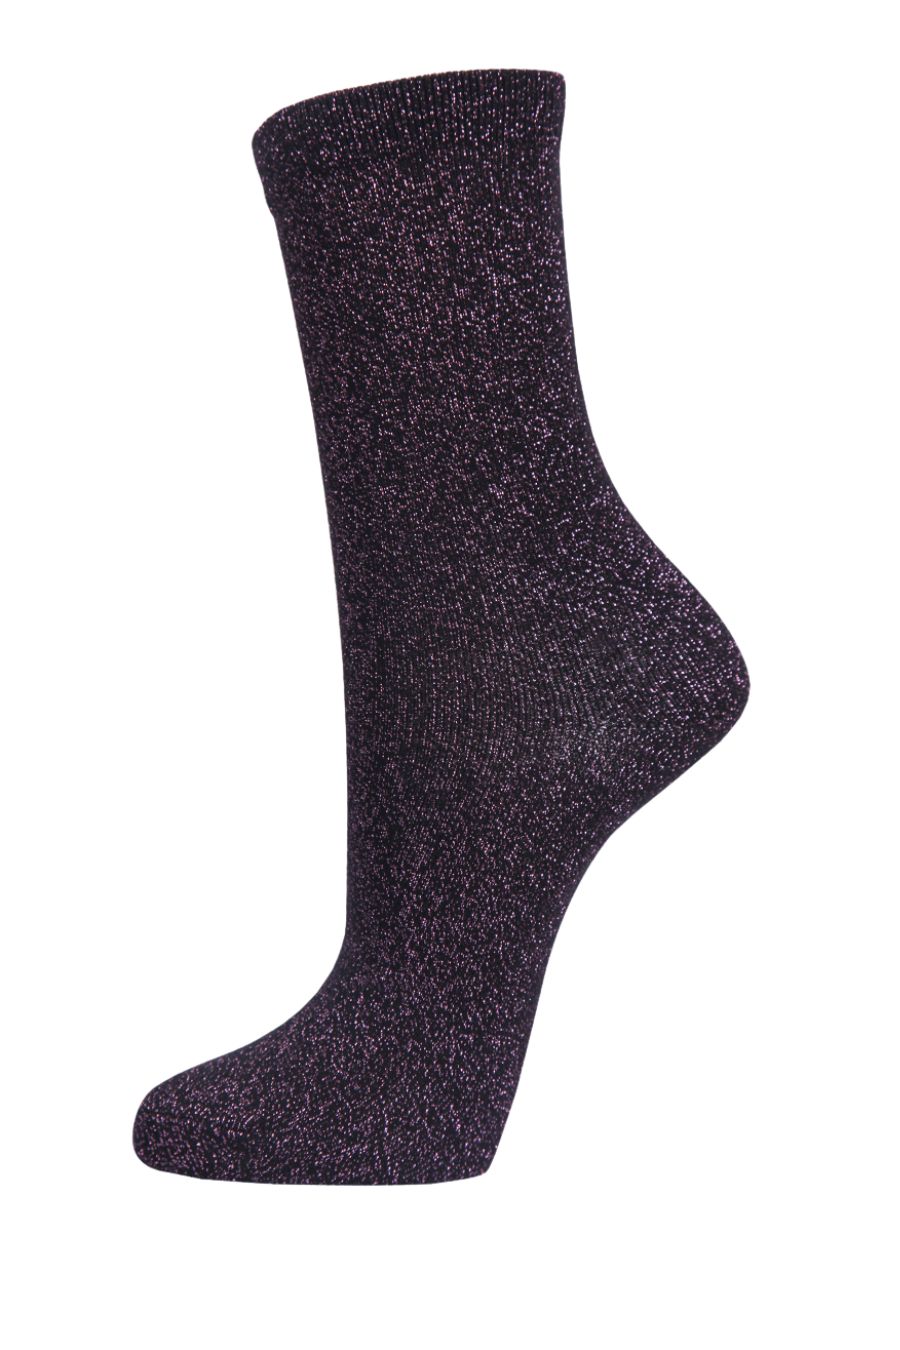 black socks with an all over pink glitter effect